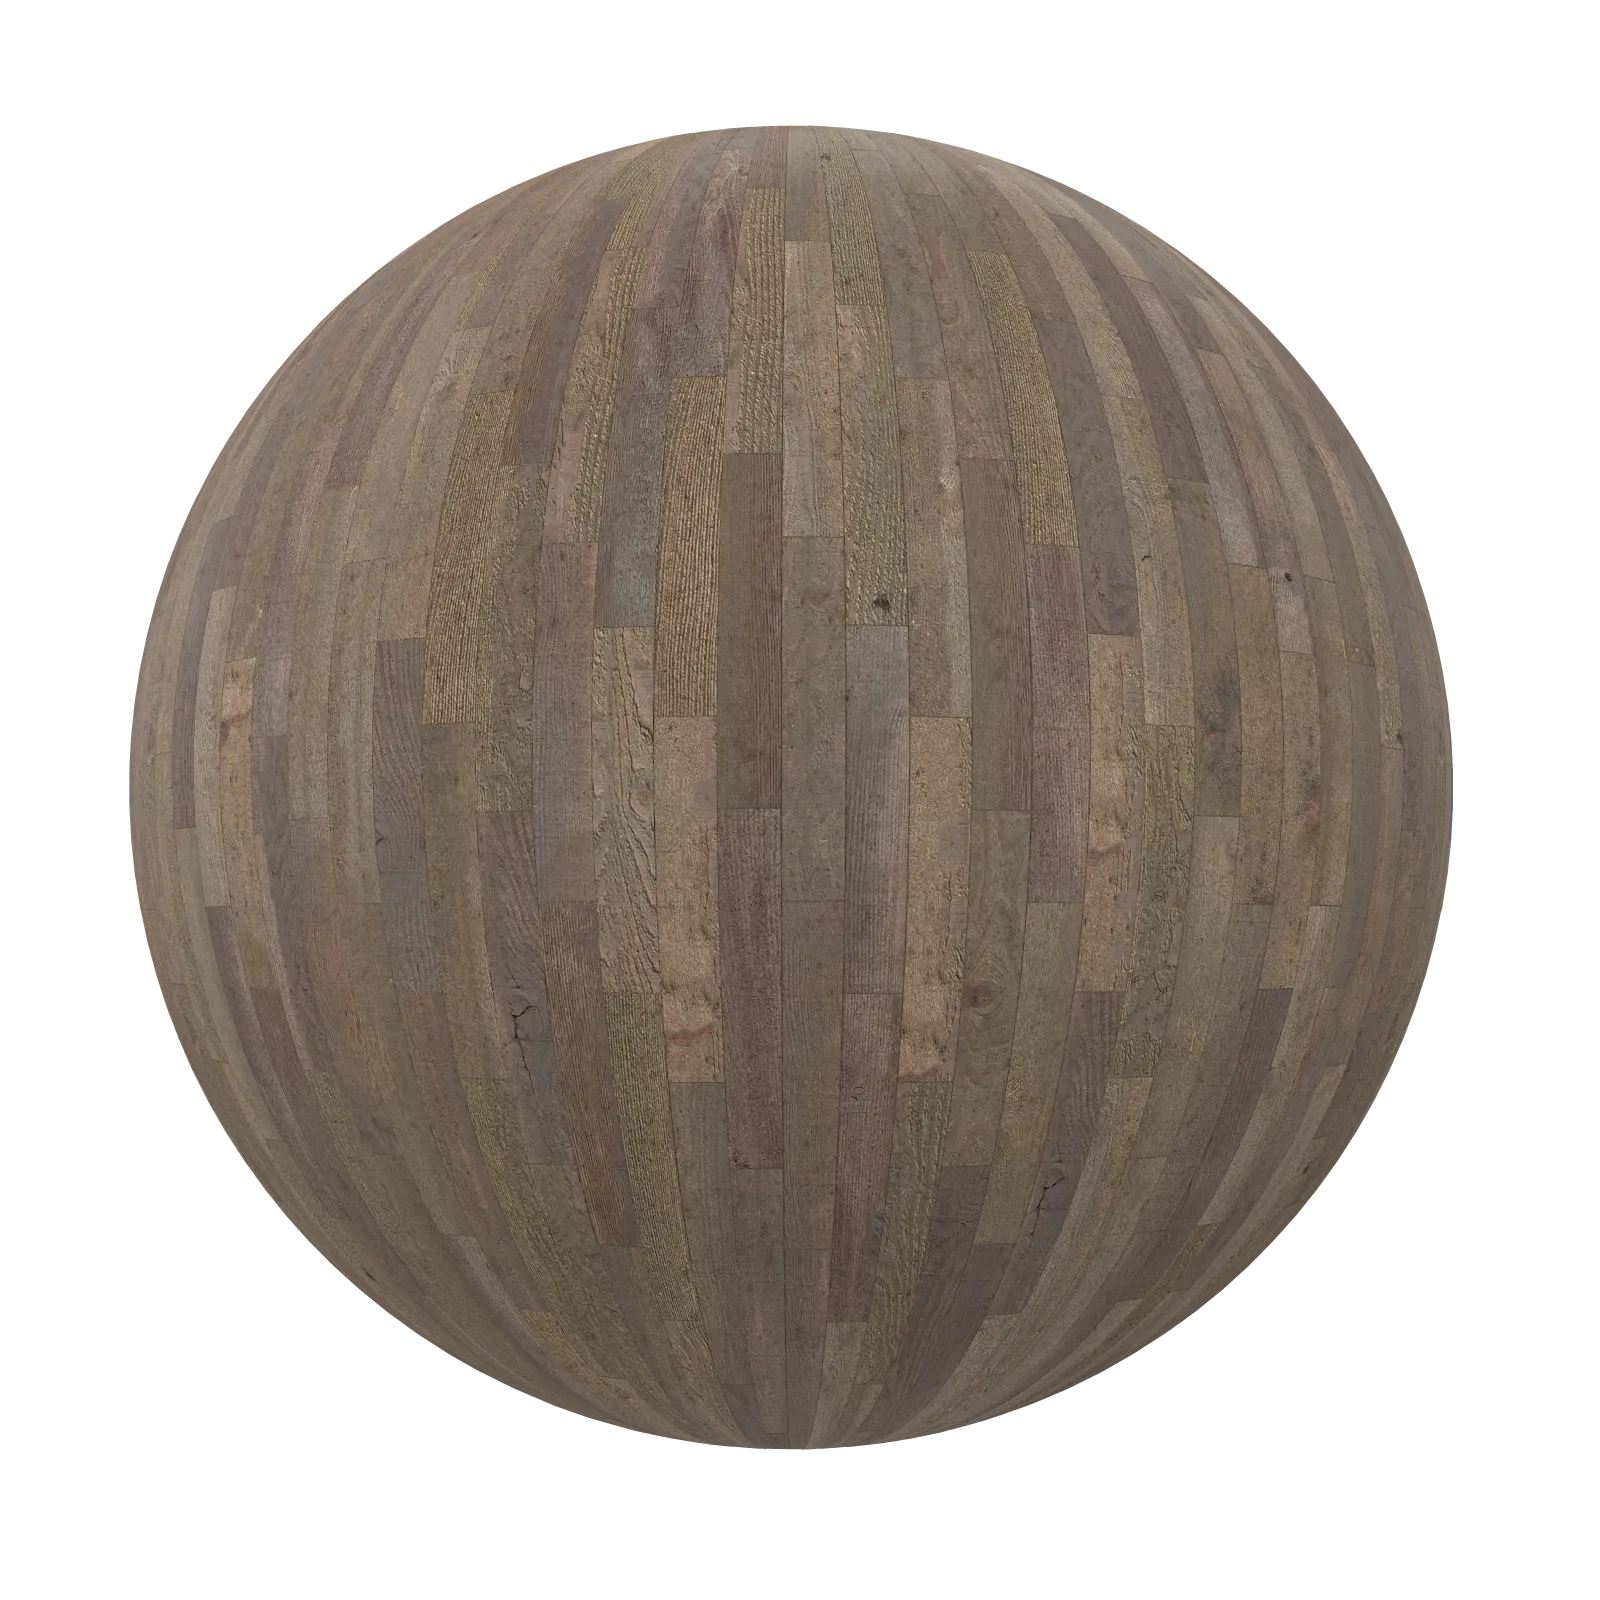 TEXTURES – WOOD – Old Wood Tiles 16